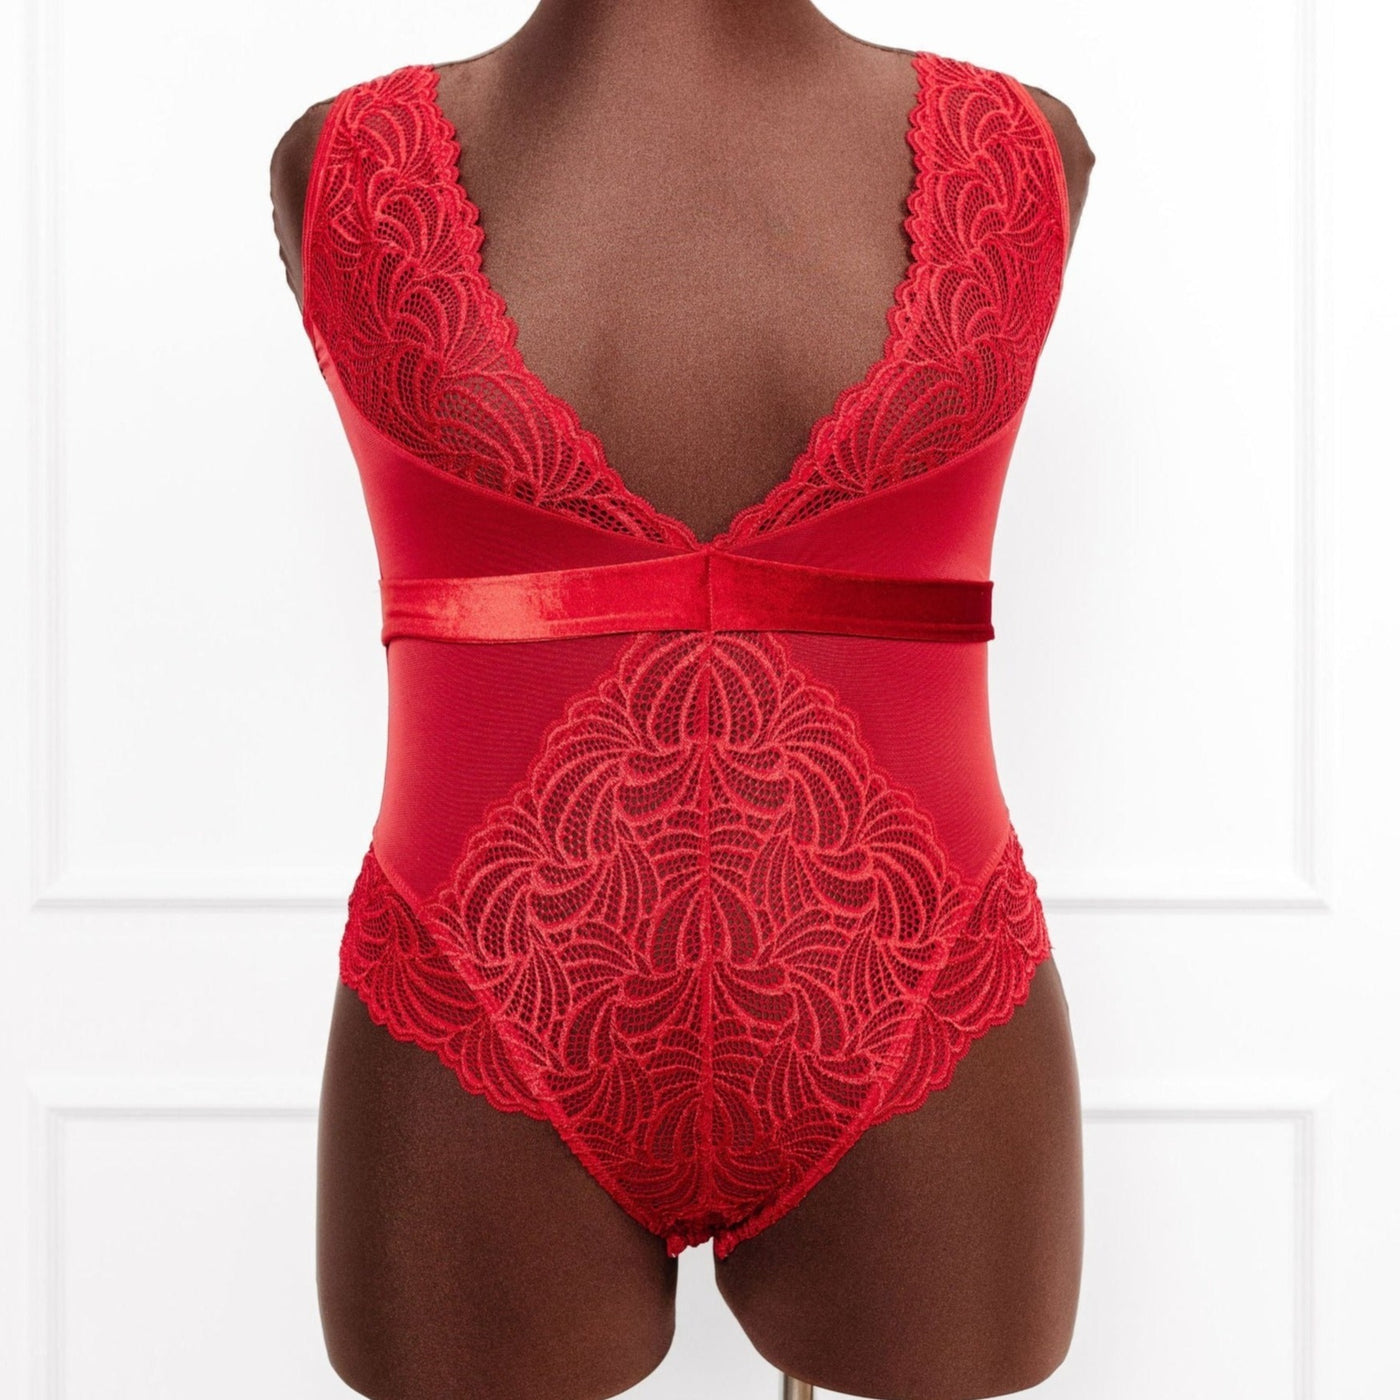 Lacy Plunge Teddy - Red